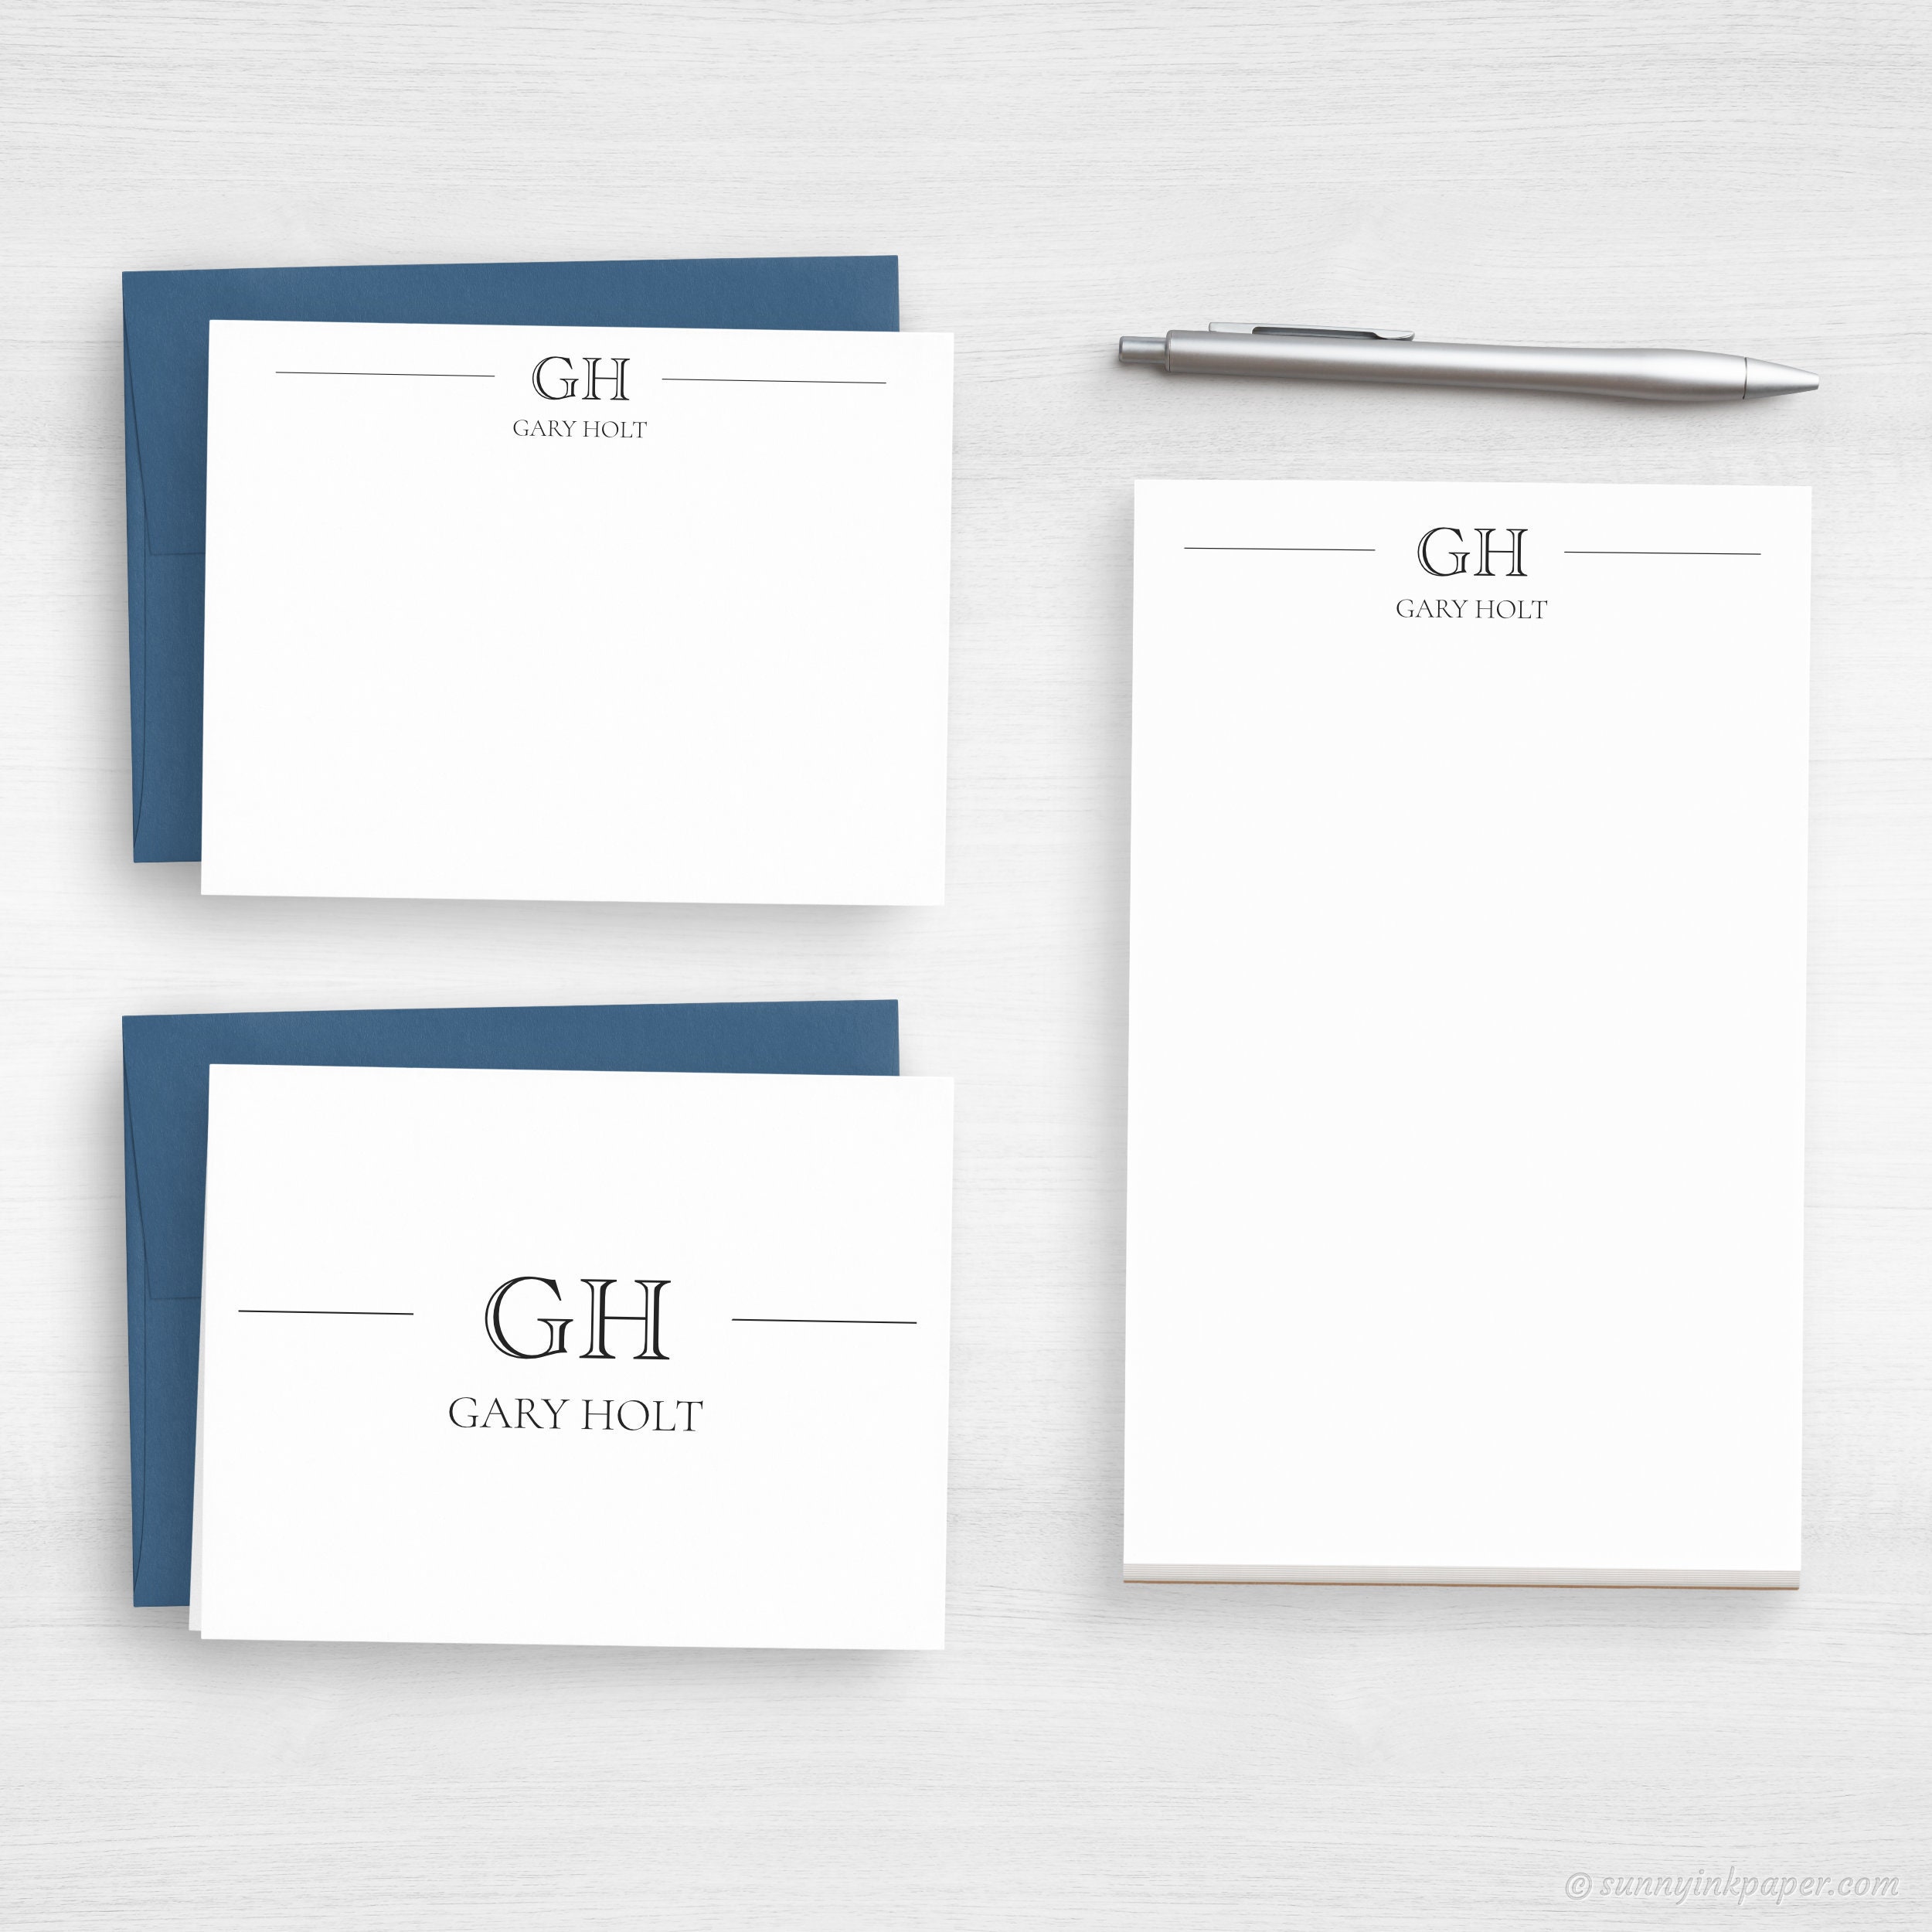 Personalized stationary samples